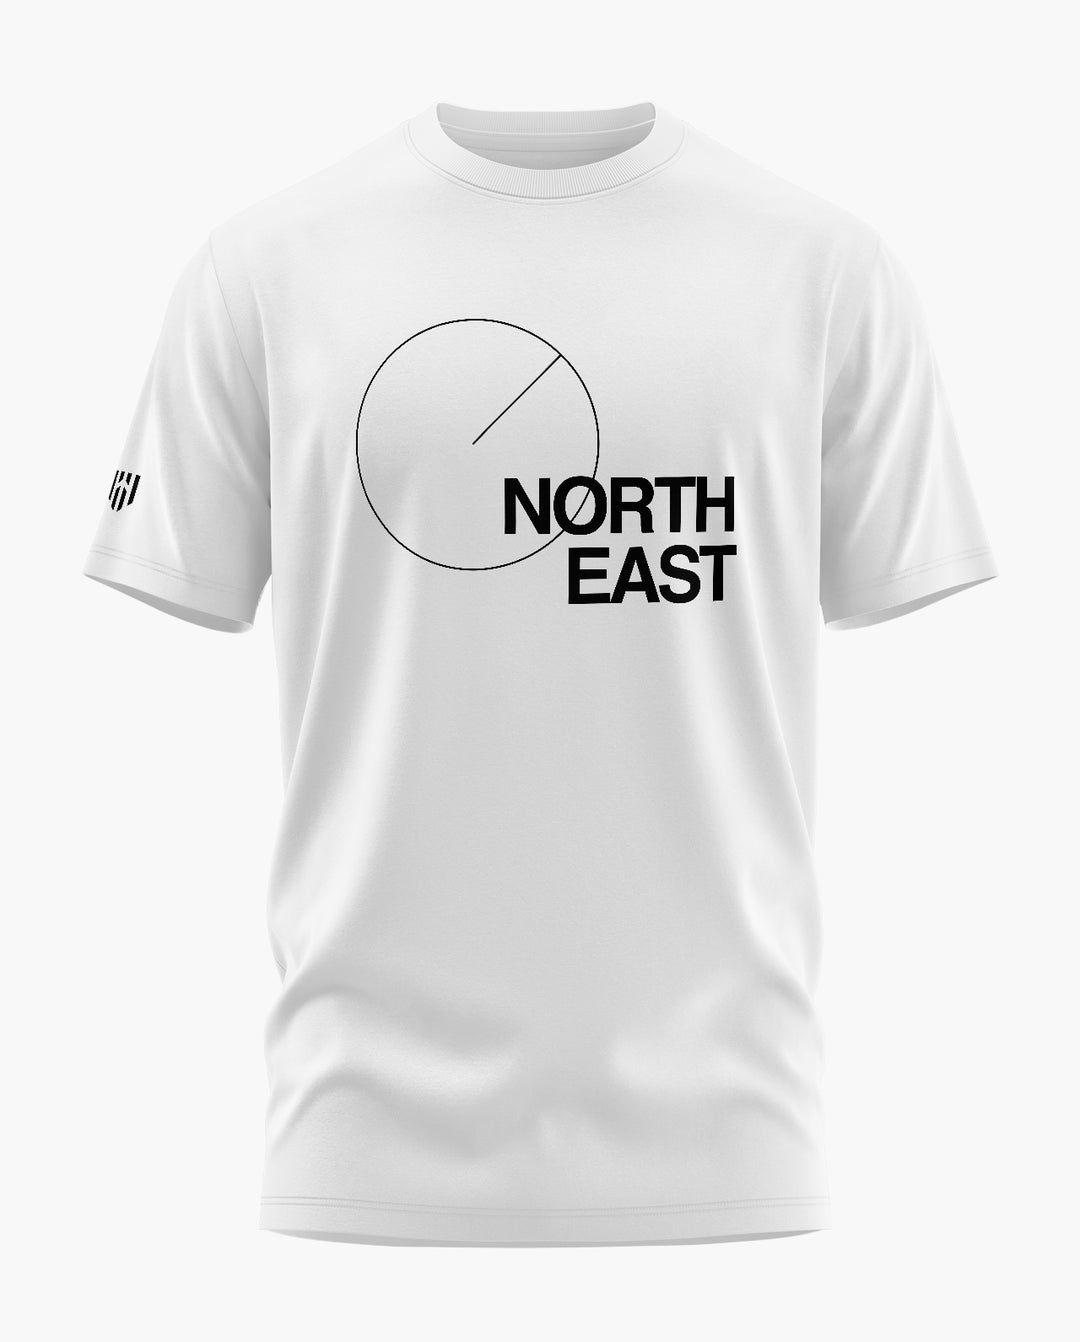 Direction North East T-Shirt